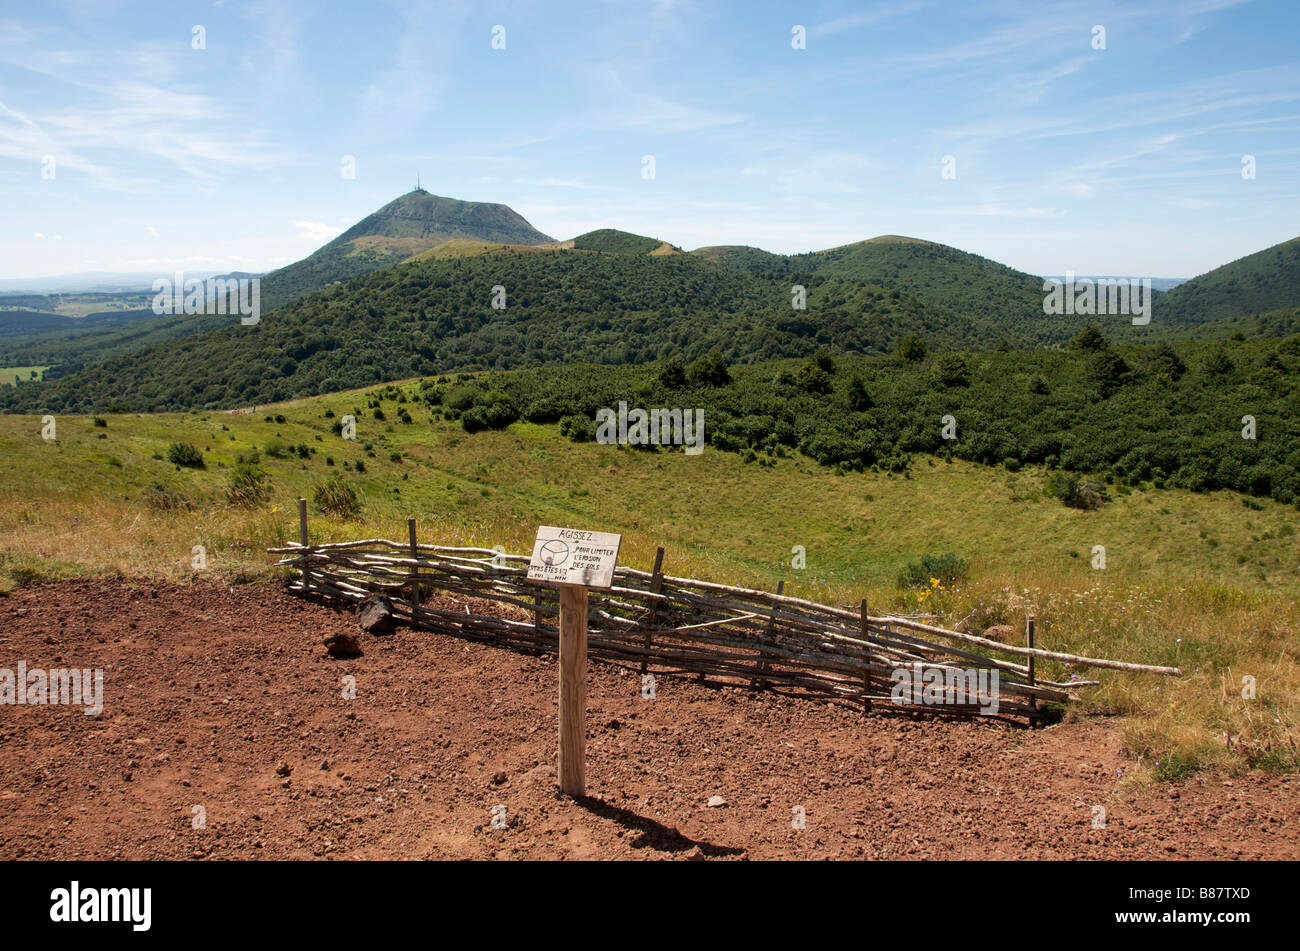 The Puy de Dome, volcano in Auvergne. France Stock Photo